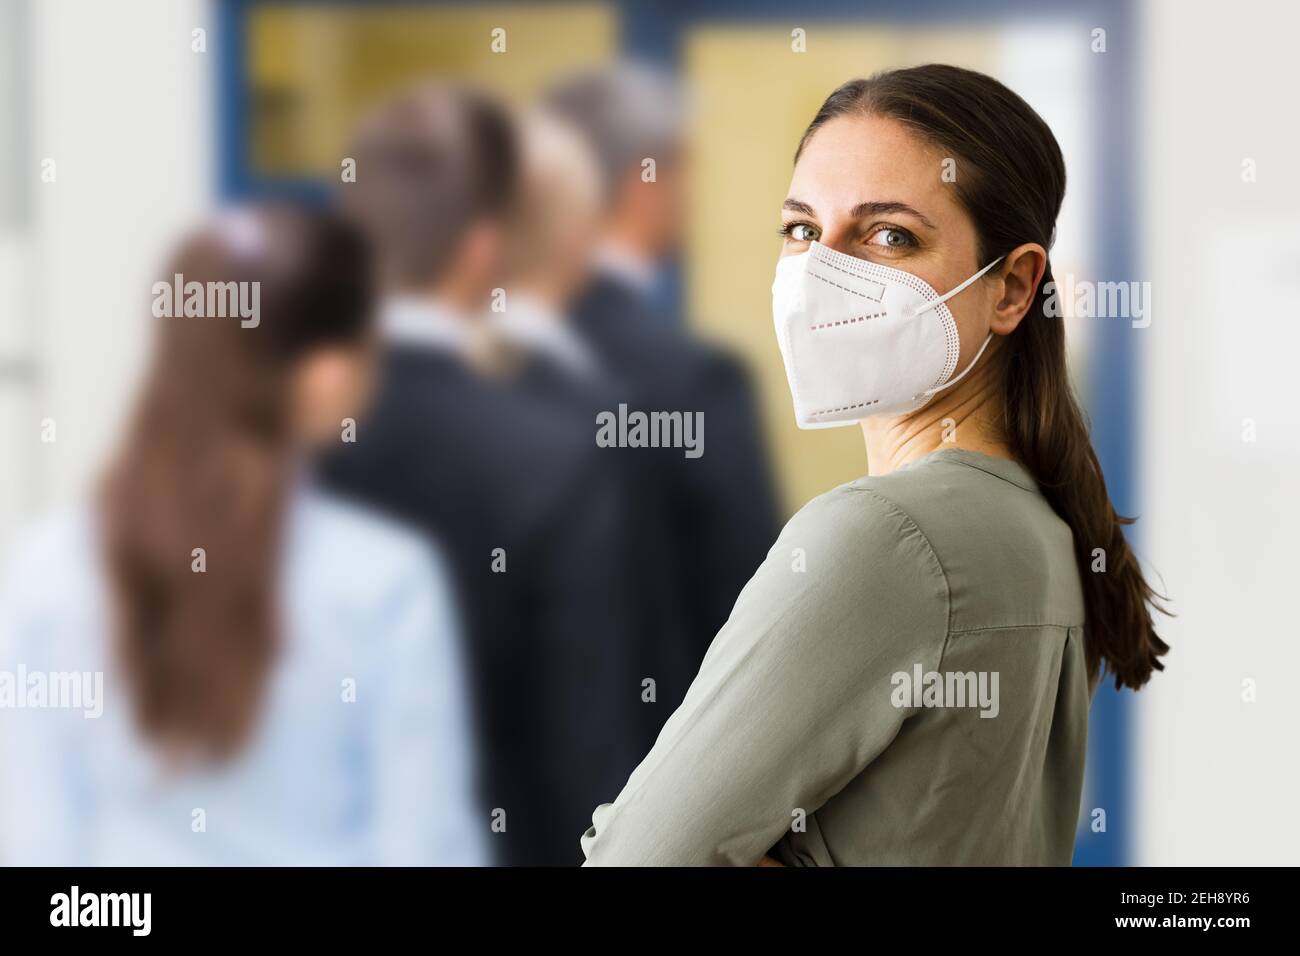 Unemployed Line Or Queue In Covid Face Mask Stock Photo